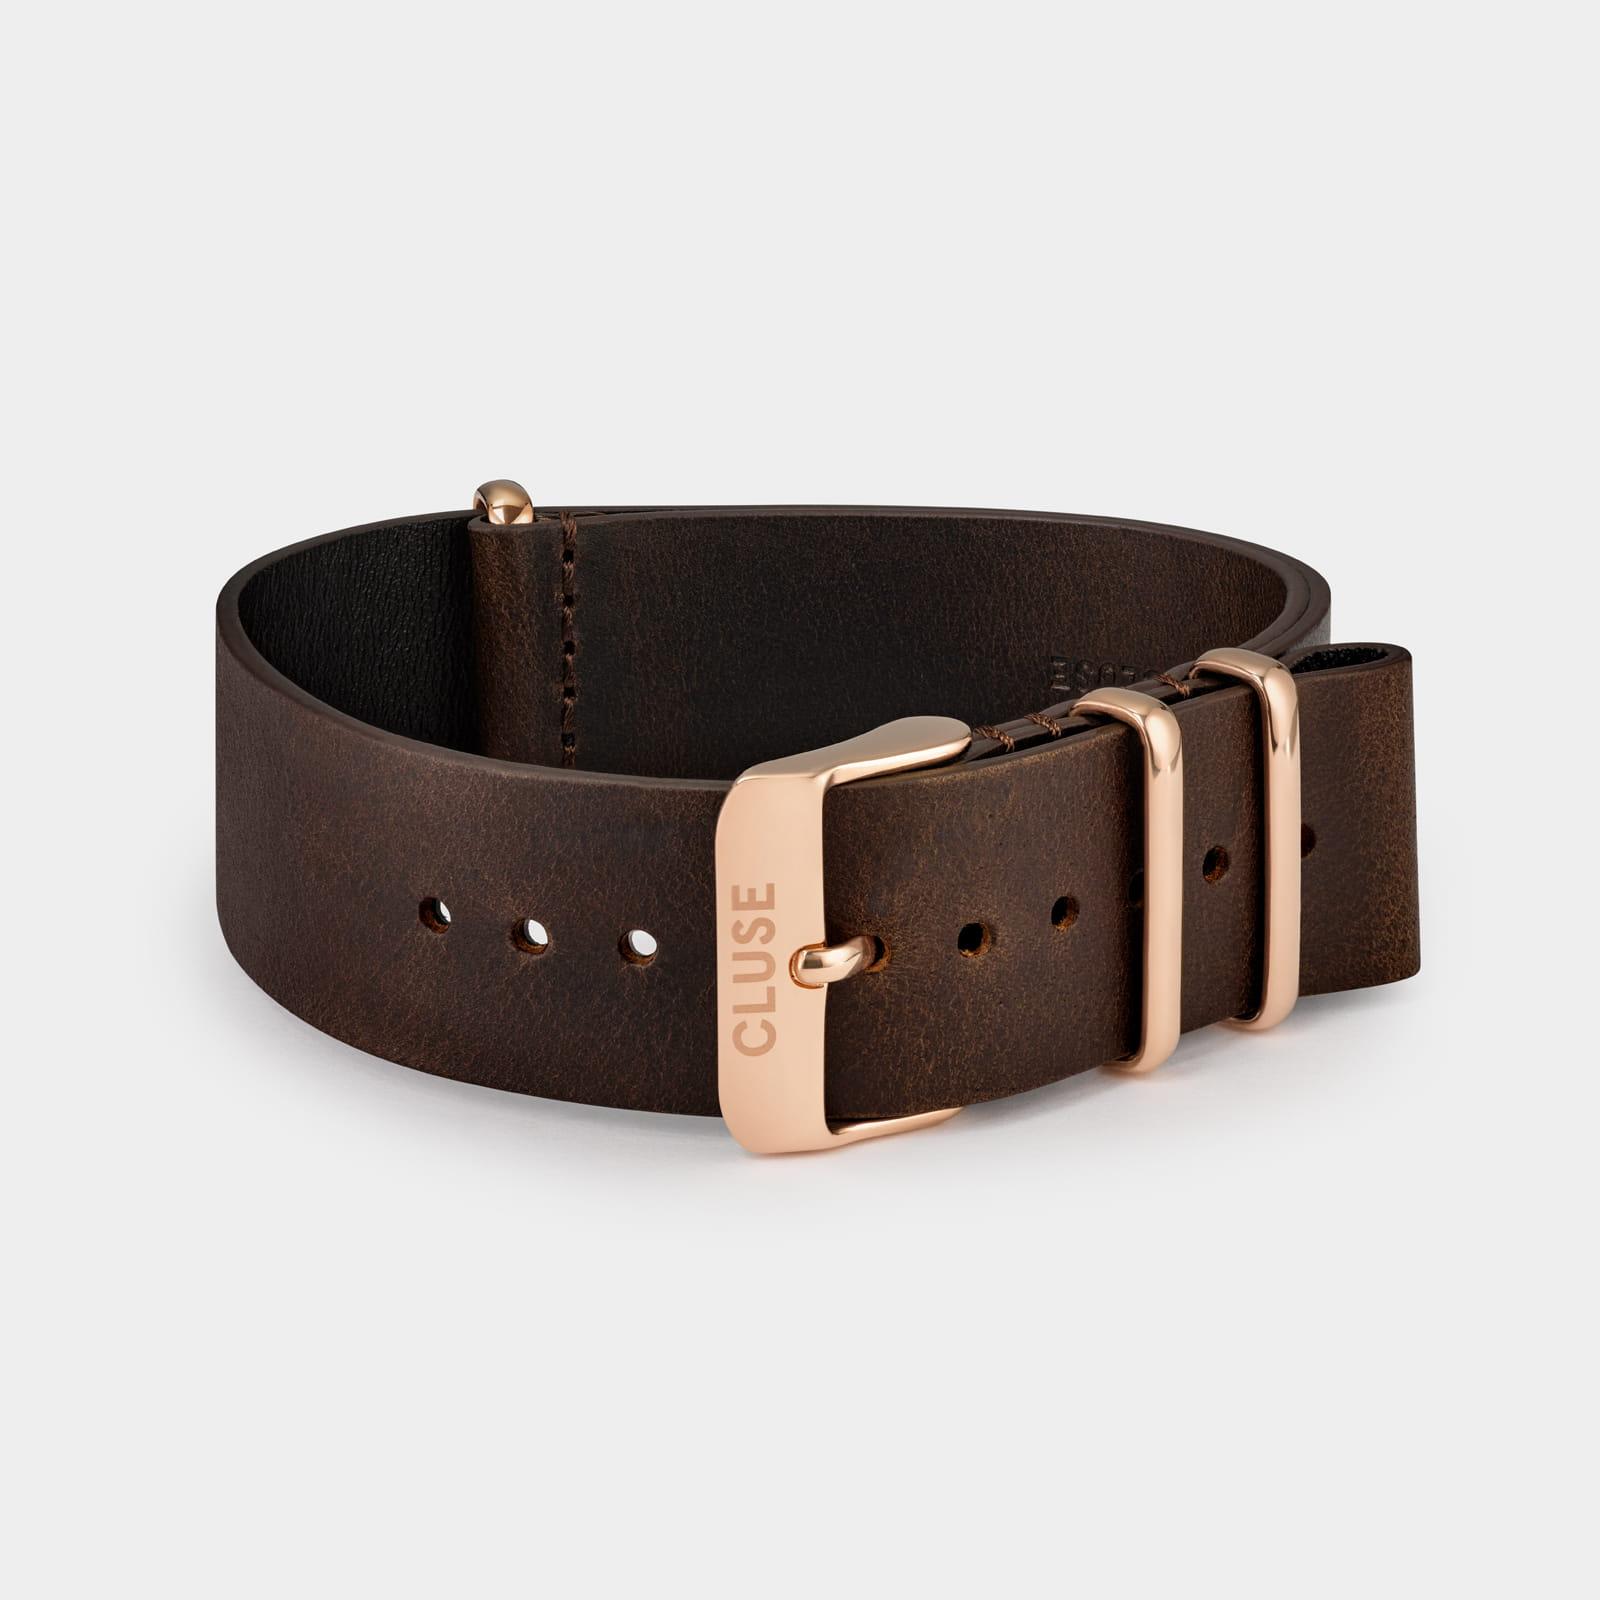 Pasek Cluse- Nato Leather,dark Brown/rose Gold 20MM